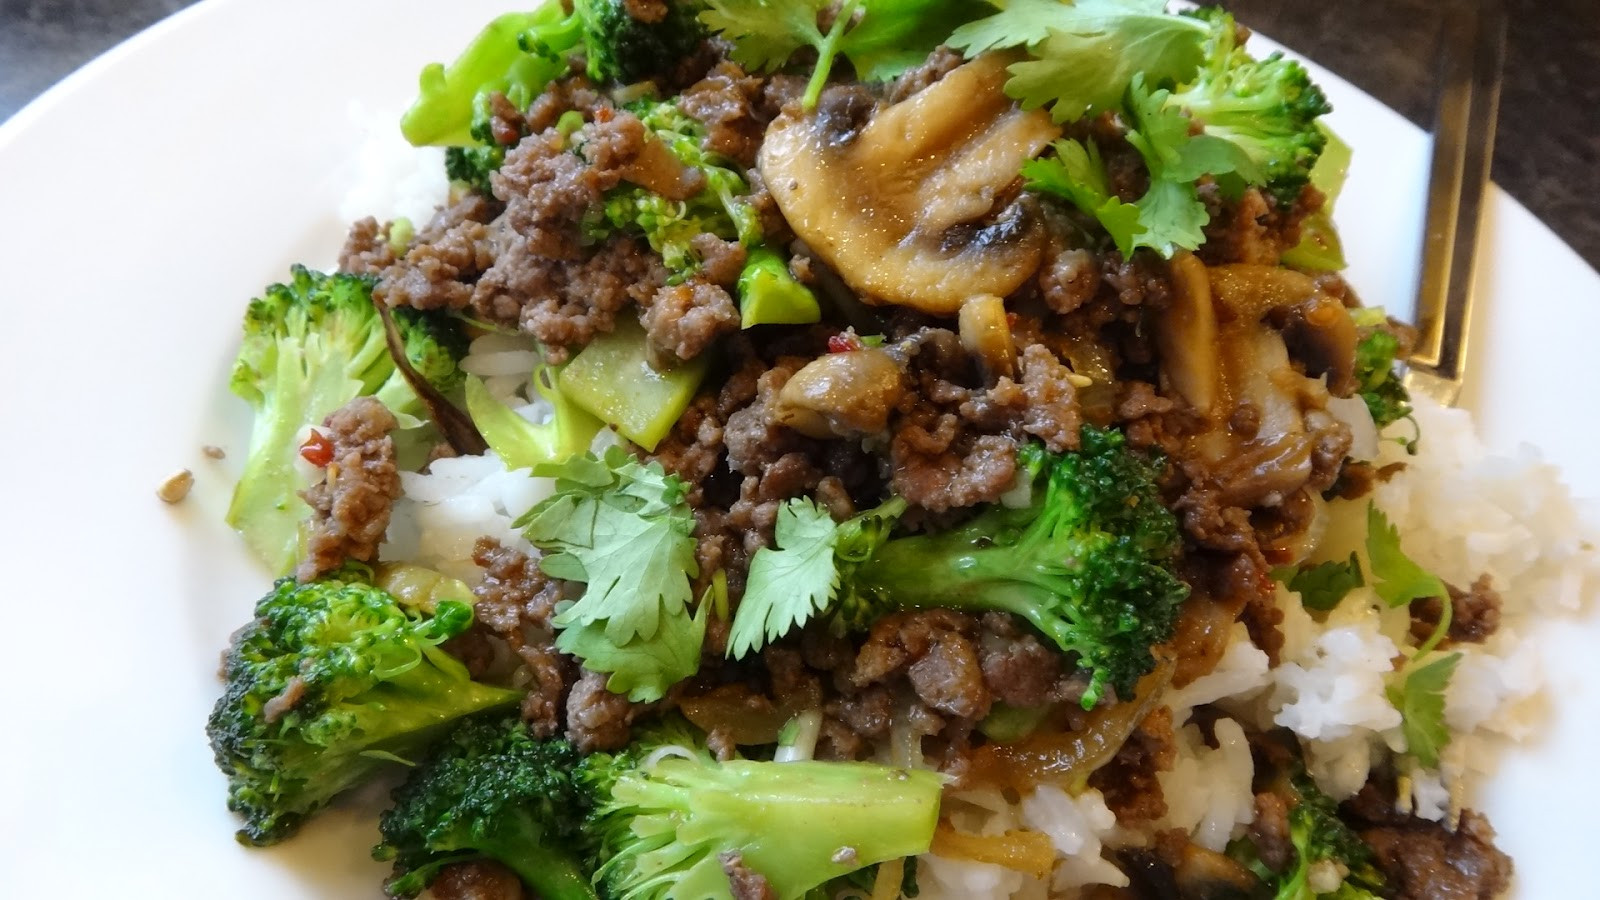 Ground Beef Broccoli Stir Fry
 I want to cook that Beef and Broccoli Stir Fry